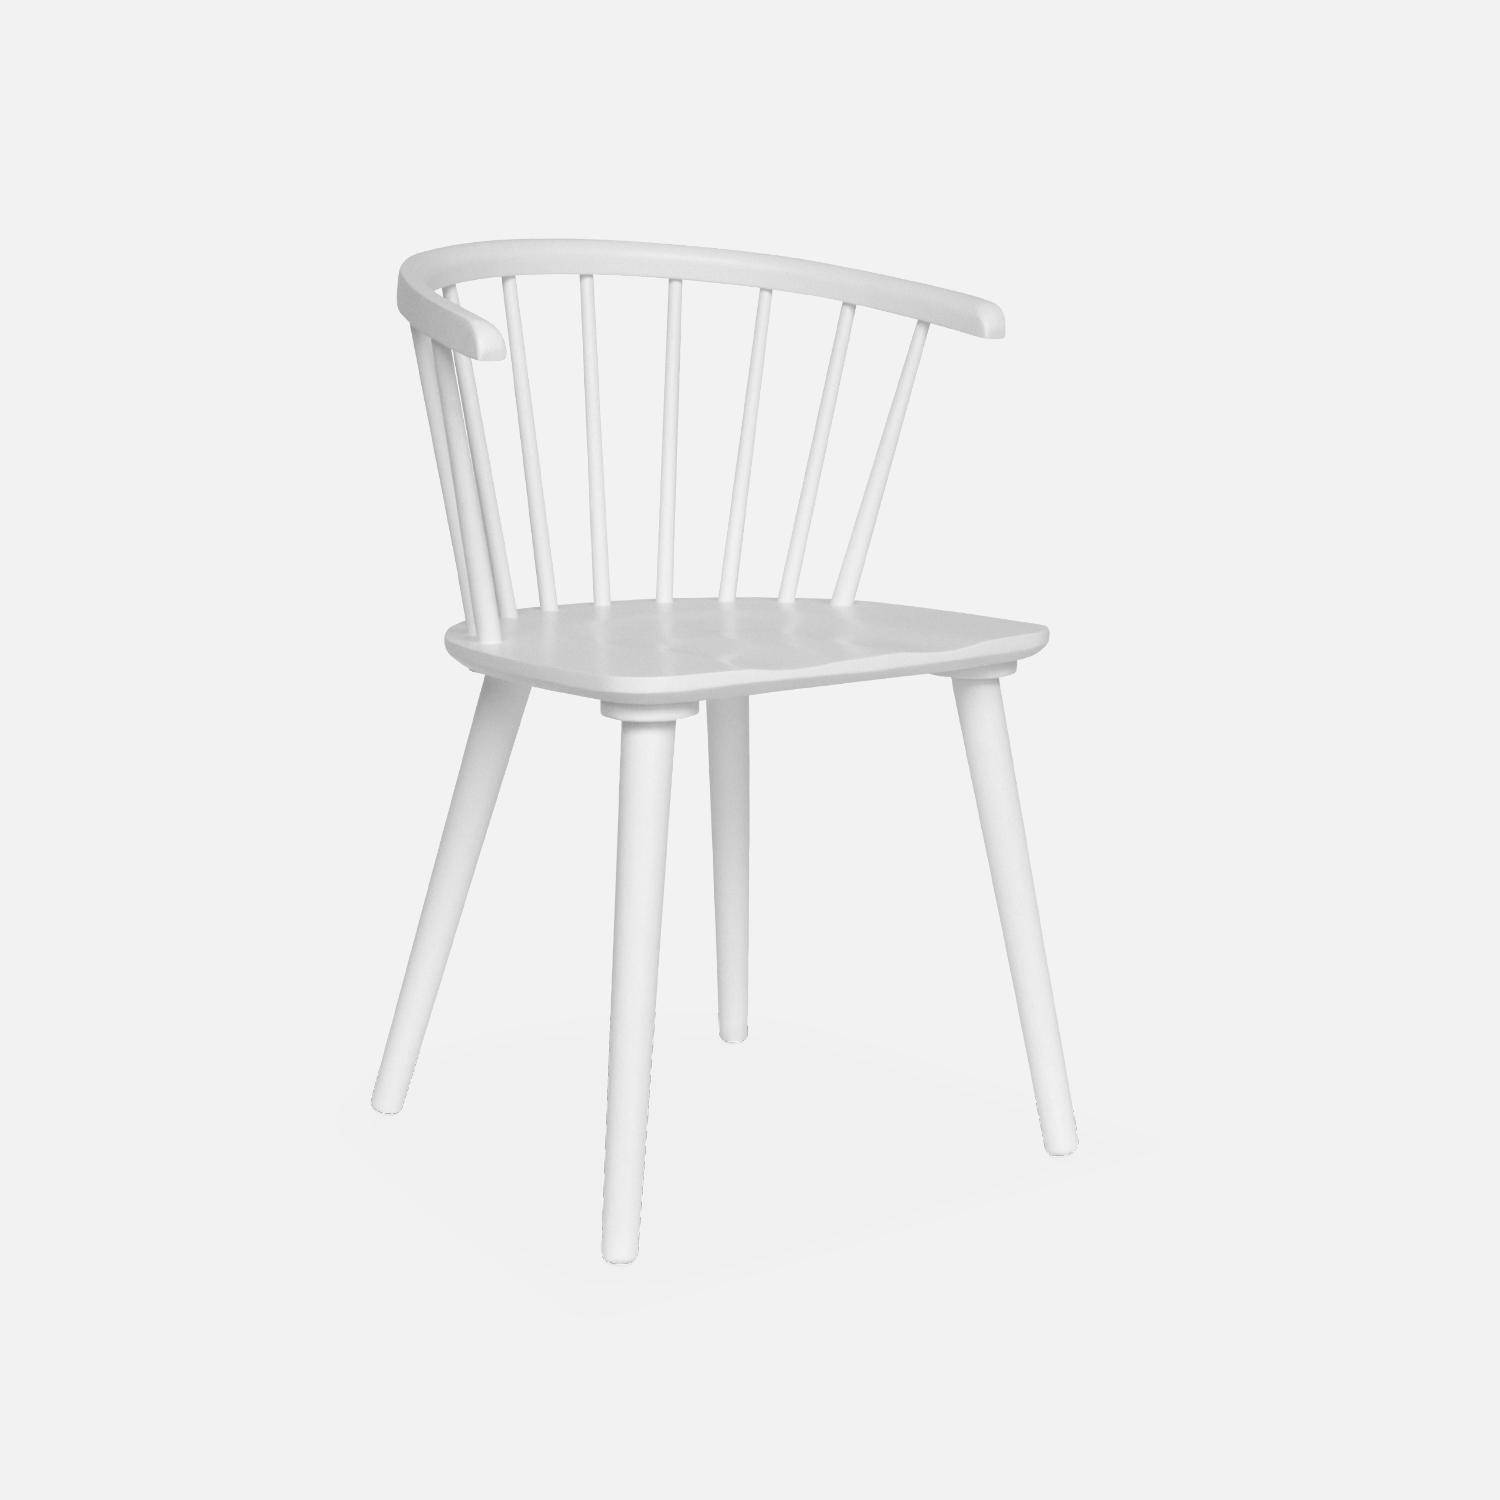 Pair of Wood and Plywood Spindle Chairs, white, L53 x W47.5 x H76cm,sweeek,Photo5